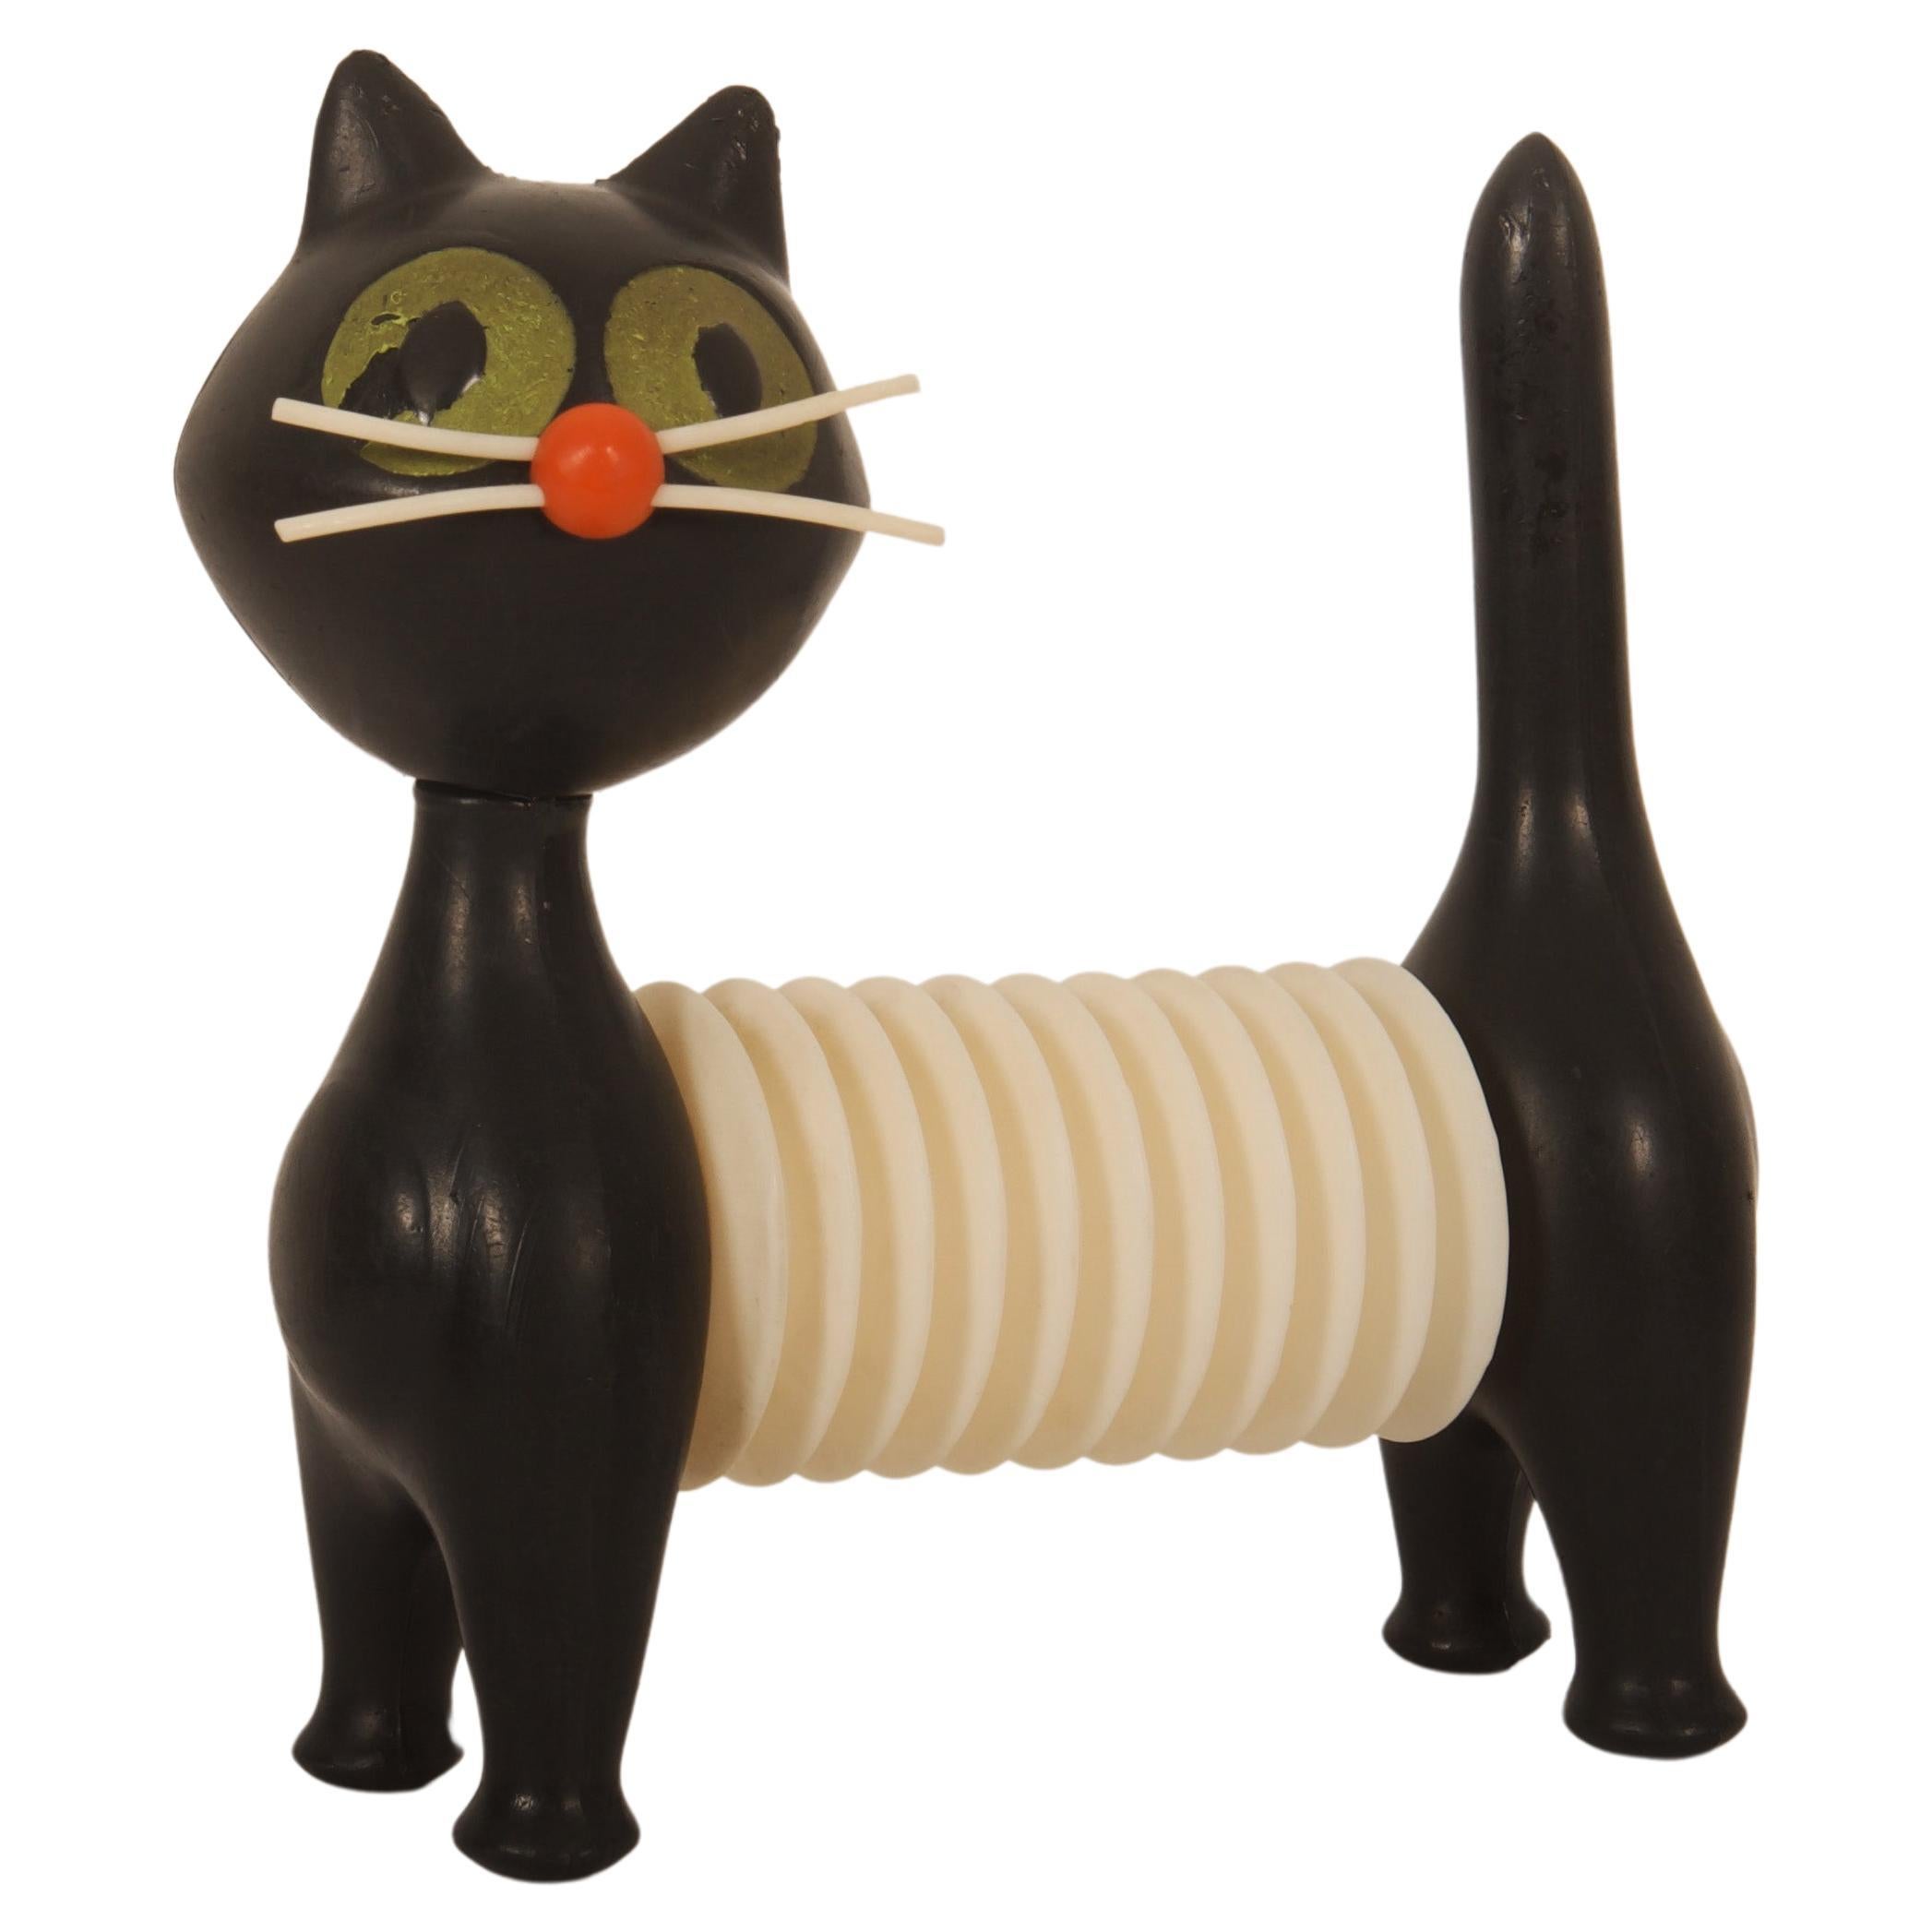 Accordion Squeaky Toy „Tomcat“ by Libuse Niklova for Fatra